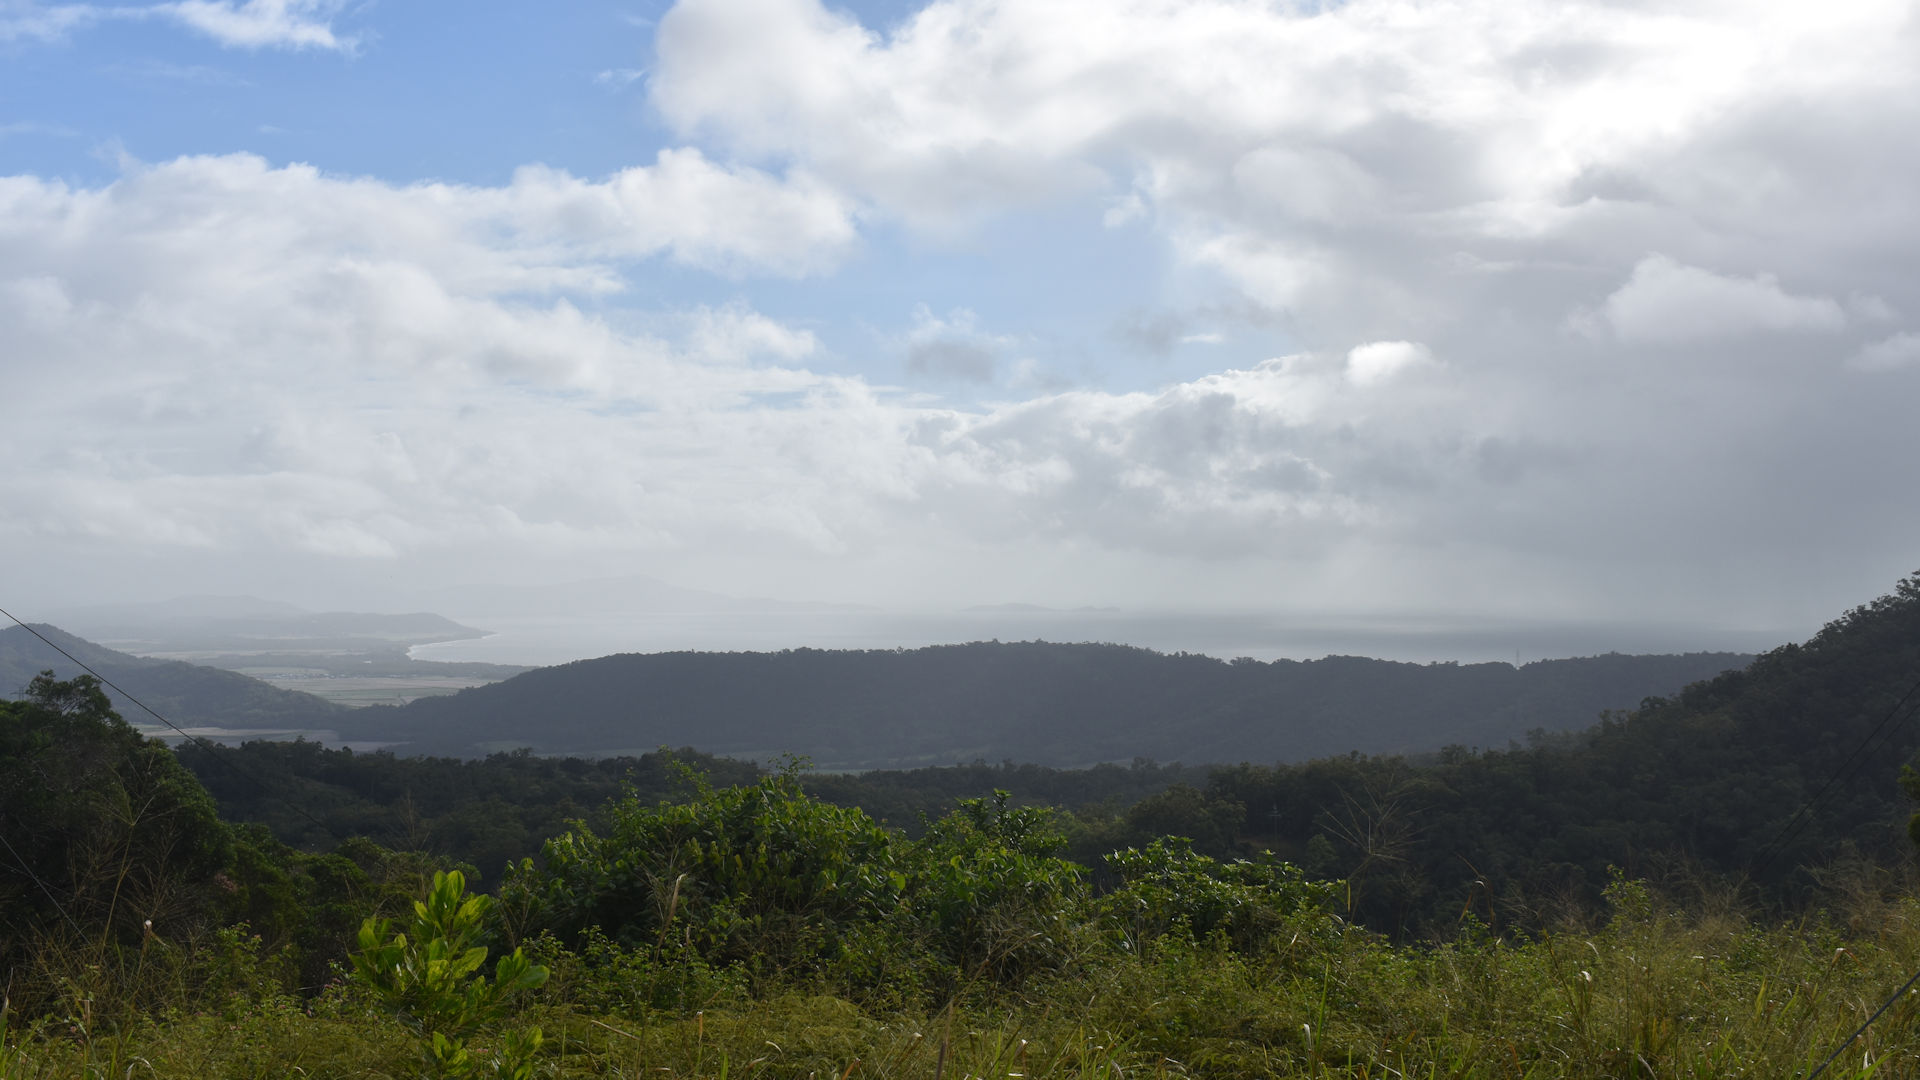 View north of Port Douglas from the Rex Range, Mossman Mount Malloy Road Lookout